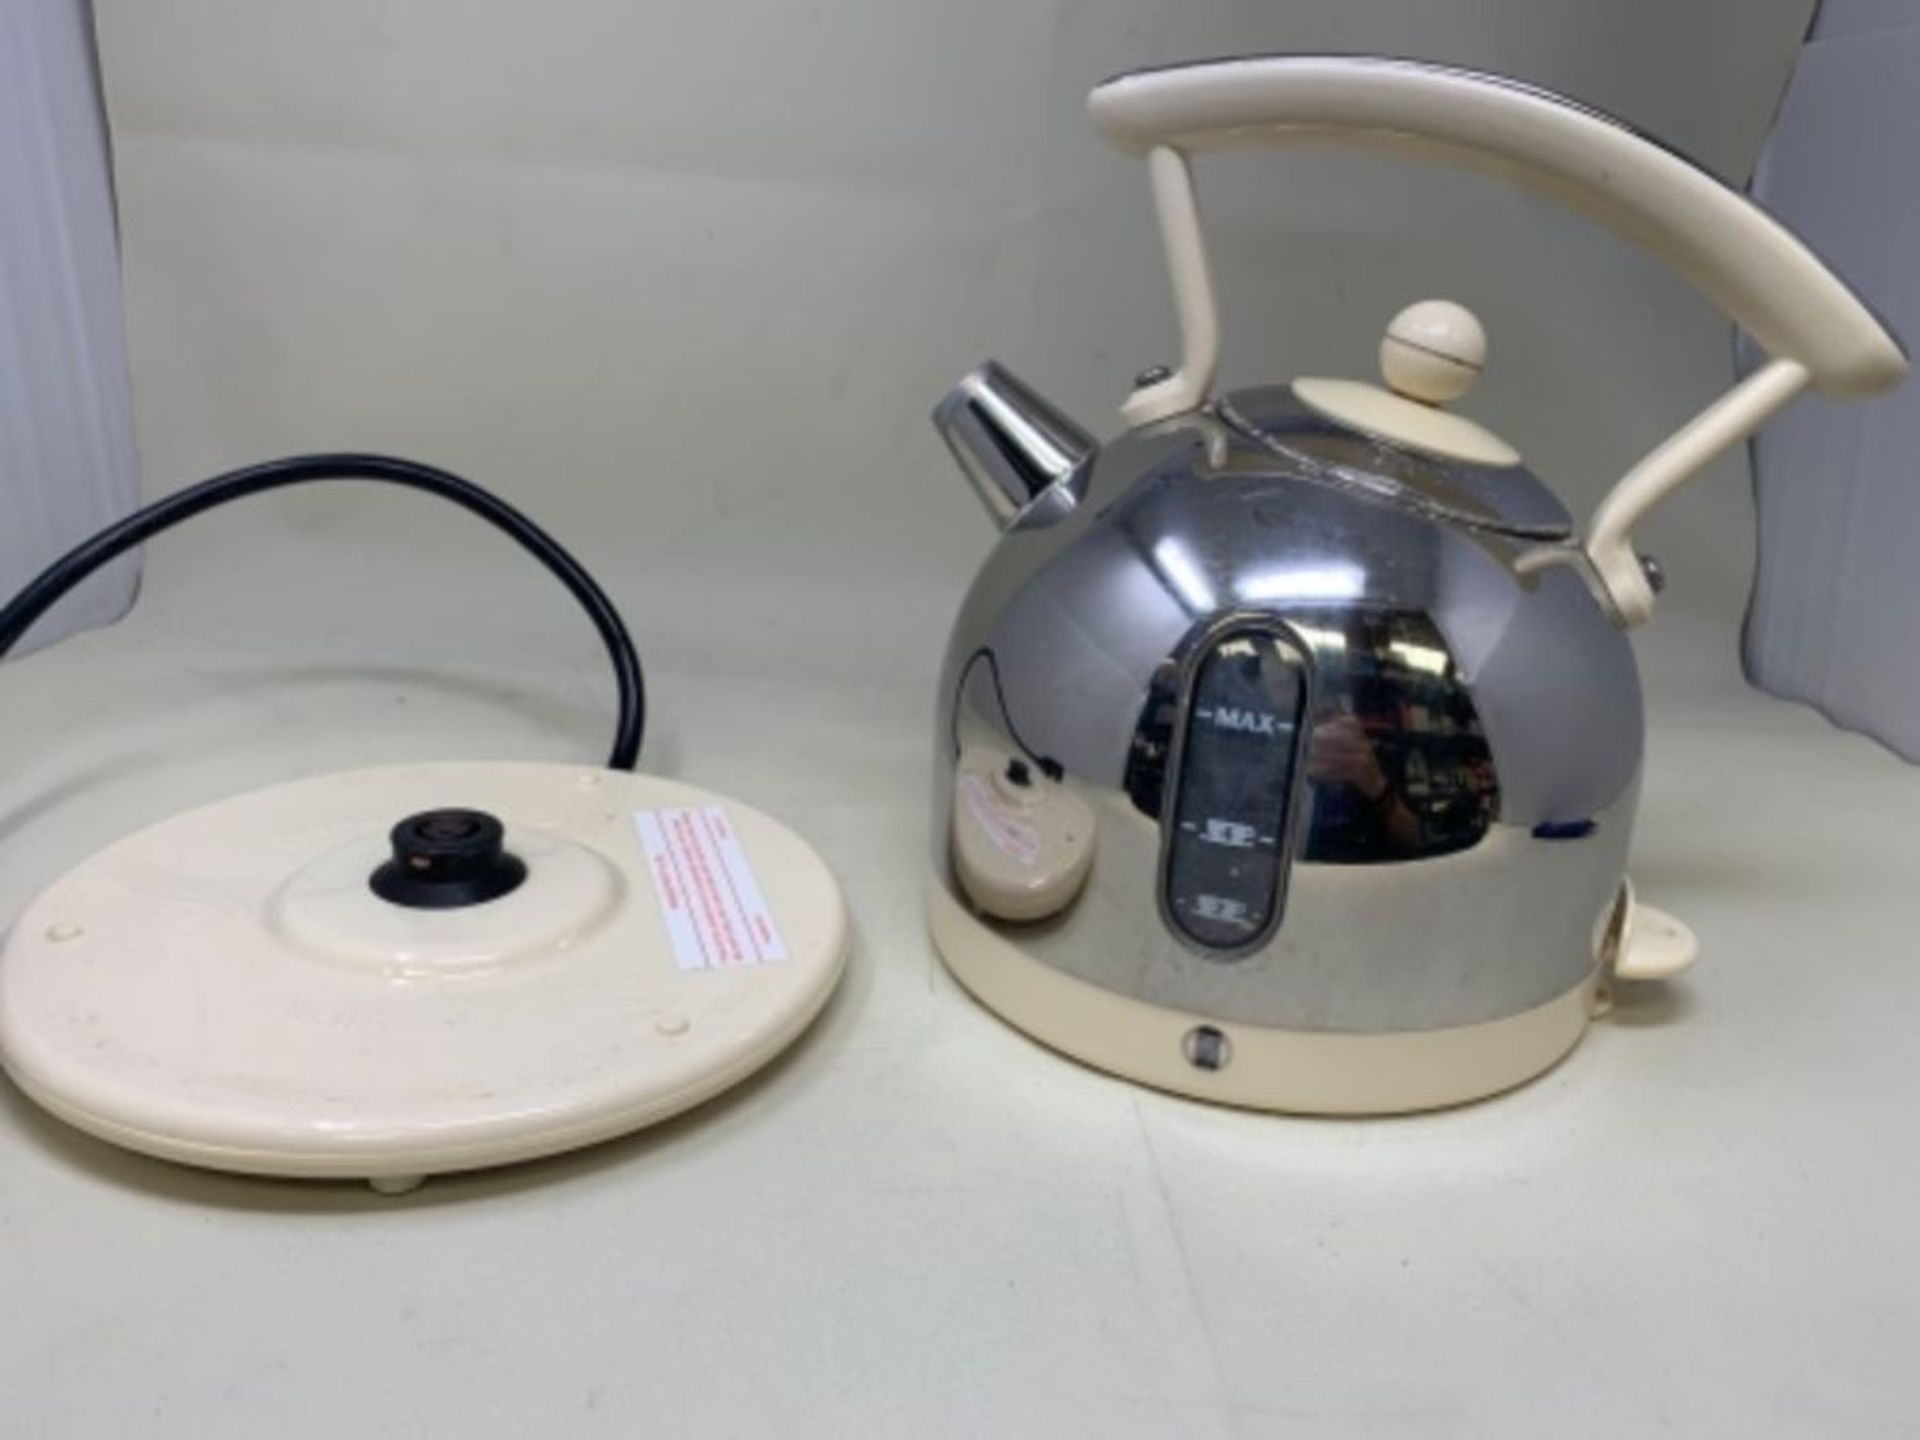 RRP £199.00 Dualit Dome Kettle 72702 - Chrome and Cream Finish - Image 3 of 3